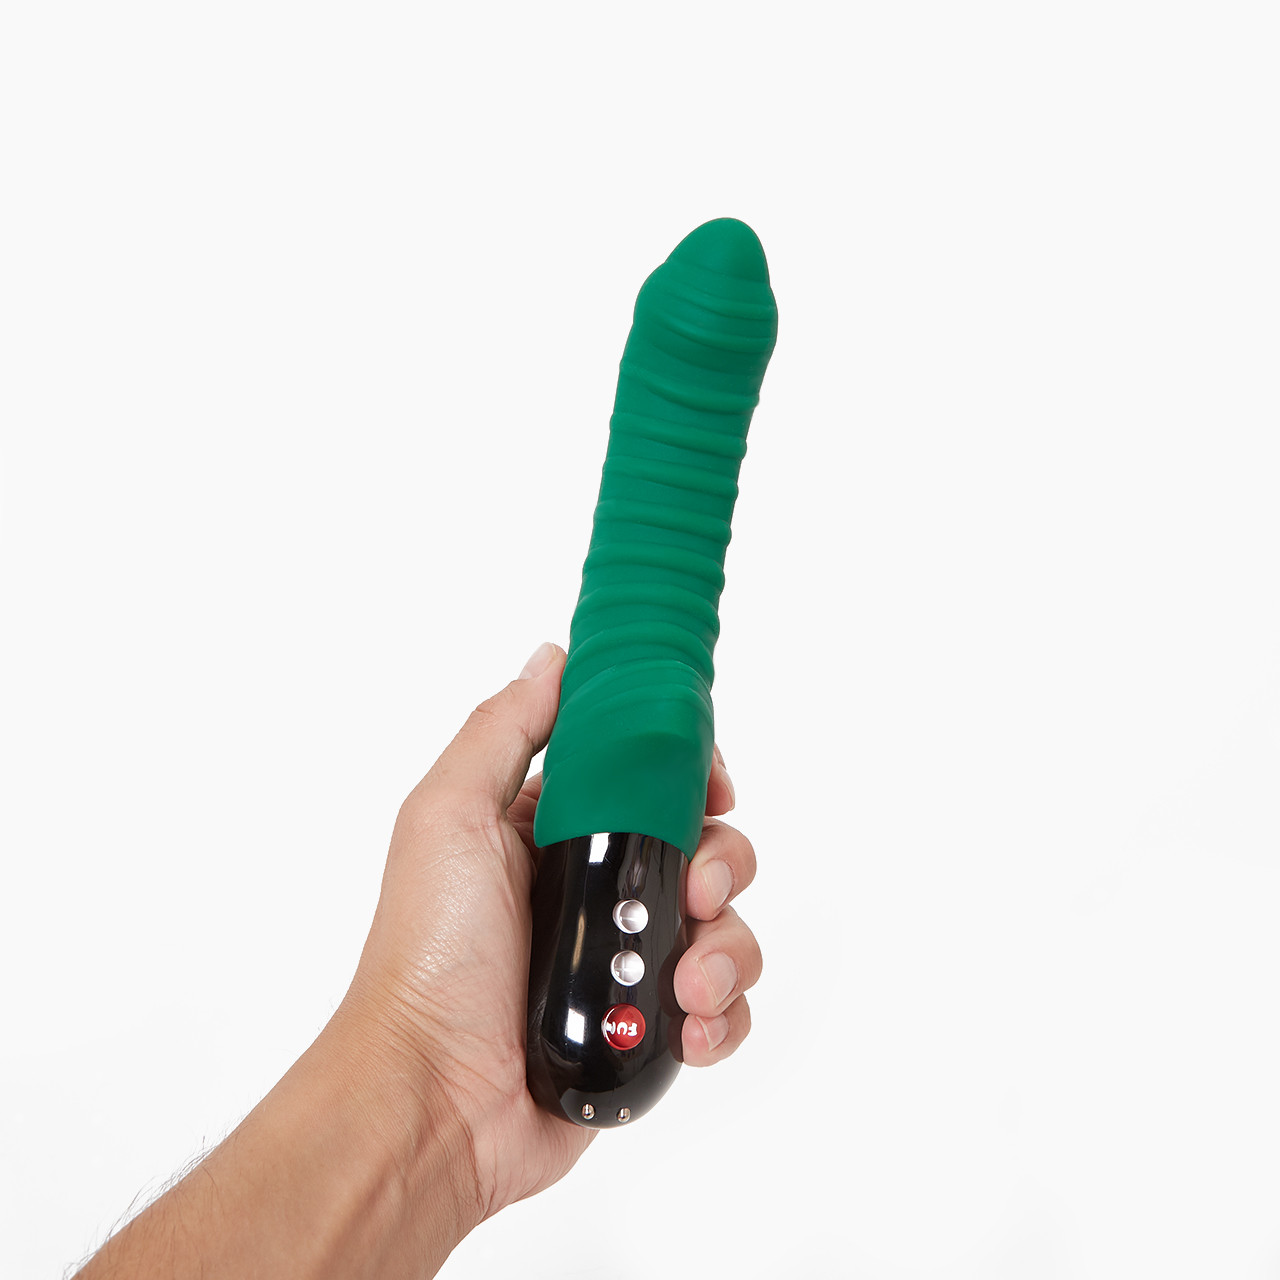 Hand holding the Fun Factory Tiger G5, a ridged green silicone vibrator